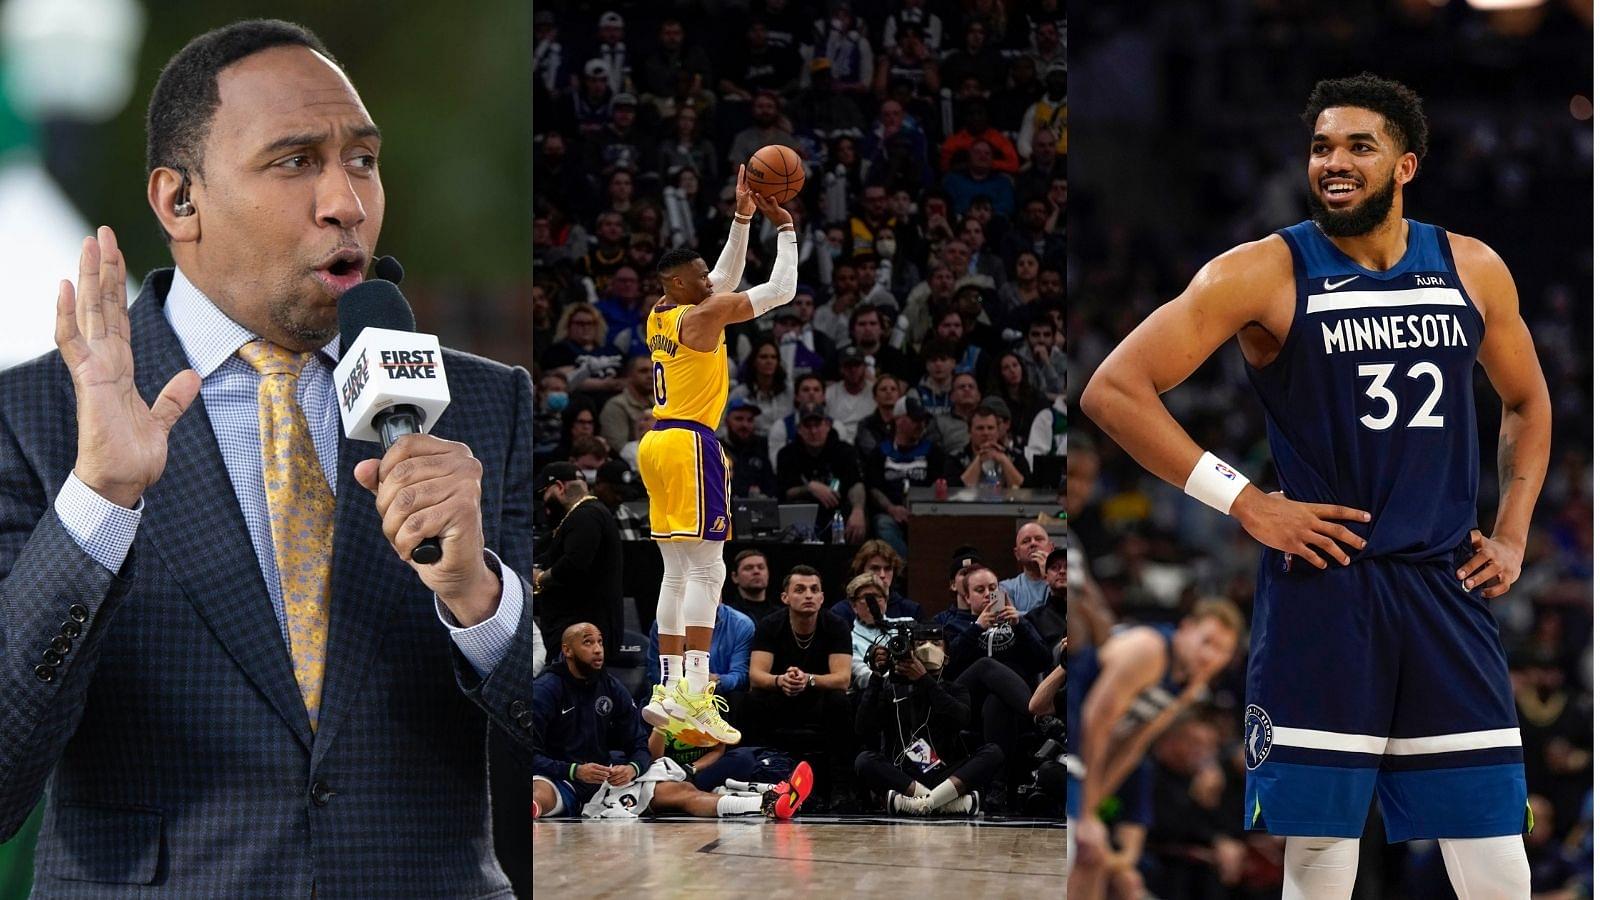 "Karl-Anthony Towns, taunting Russell Westbrook like that was CLASSLESS": Stephen A. Smith calls out KAT for mocking Lakers star, tells him to first achieve bigger things